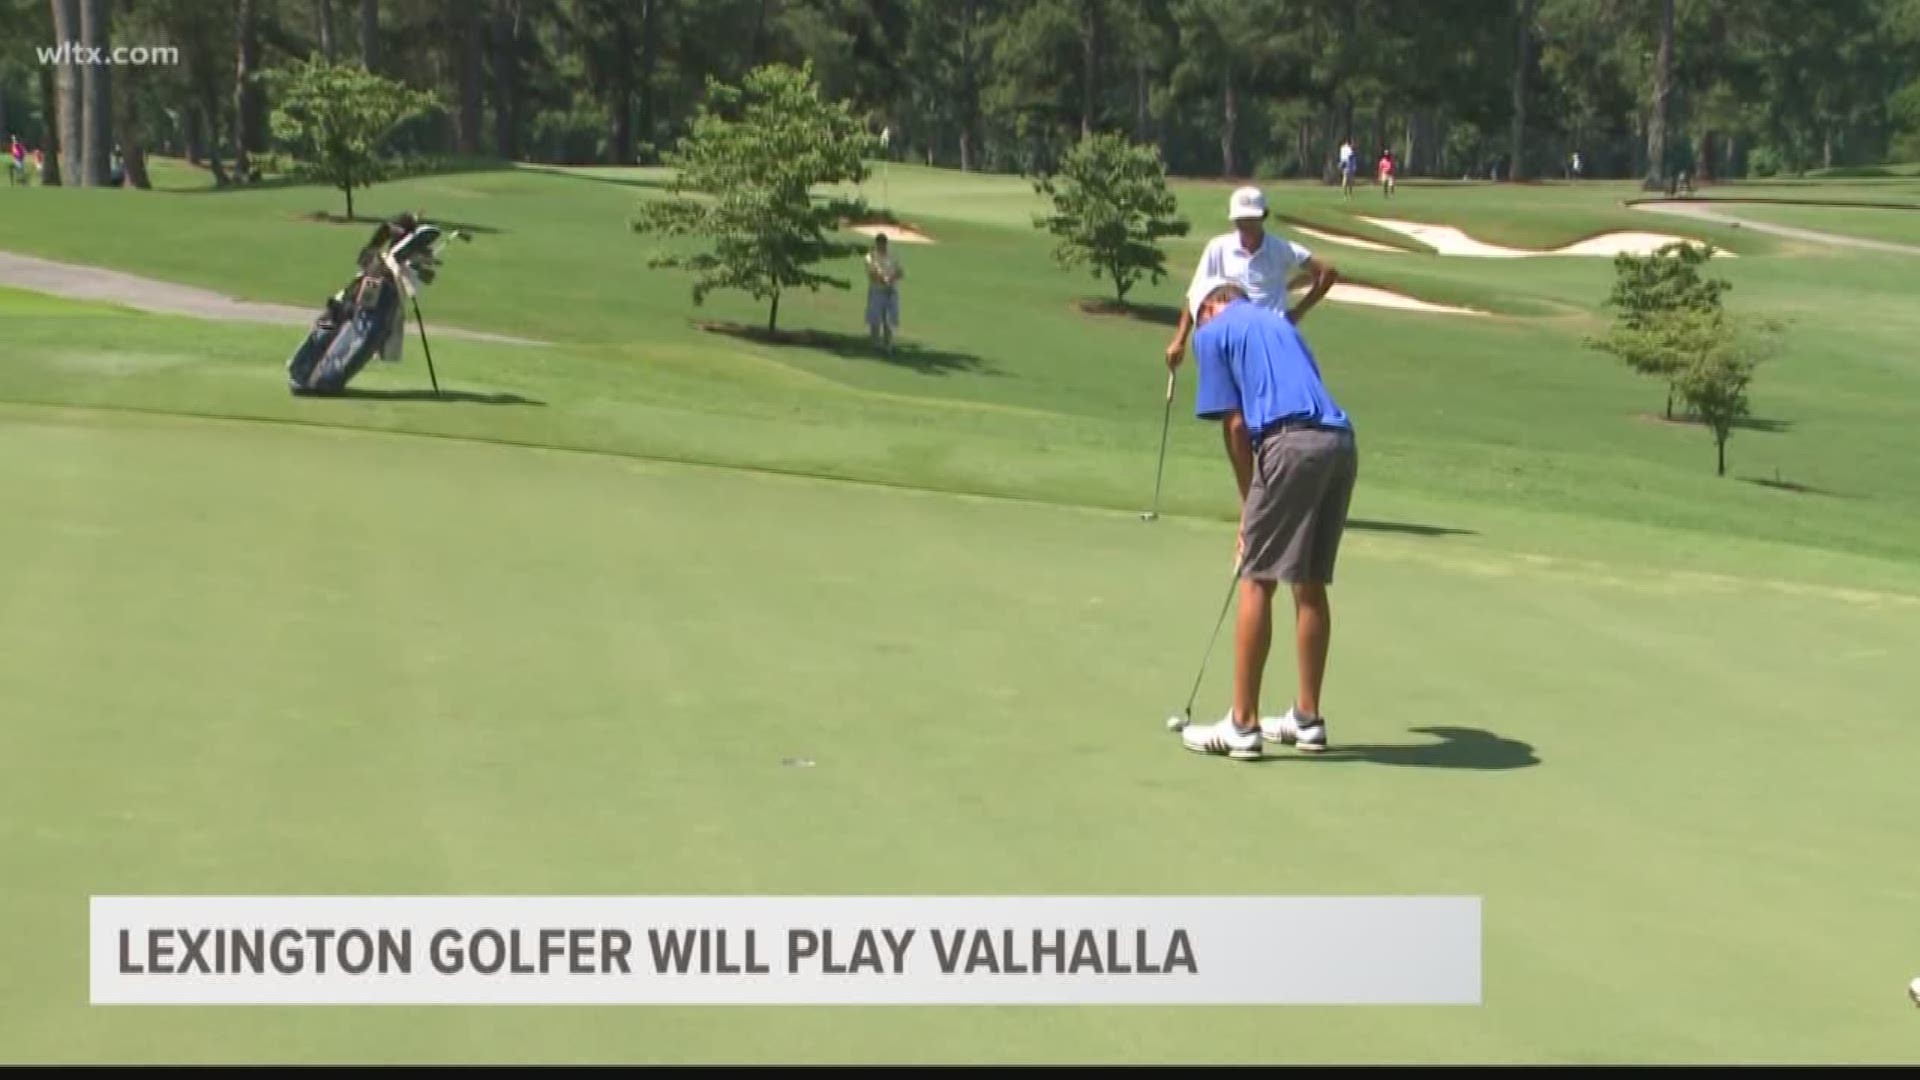 Lexington golfer Dillon Hite will be playing the Valhalla Golf Club in Louisville later this month. He will be competing in the Boys Junior PGA Championship.